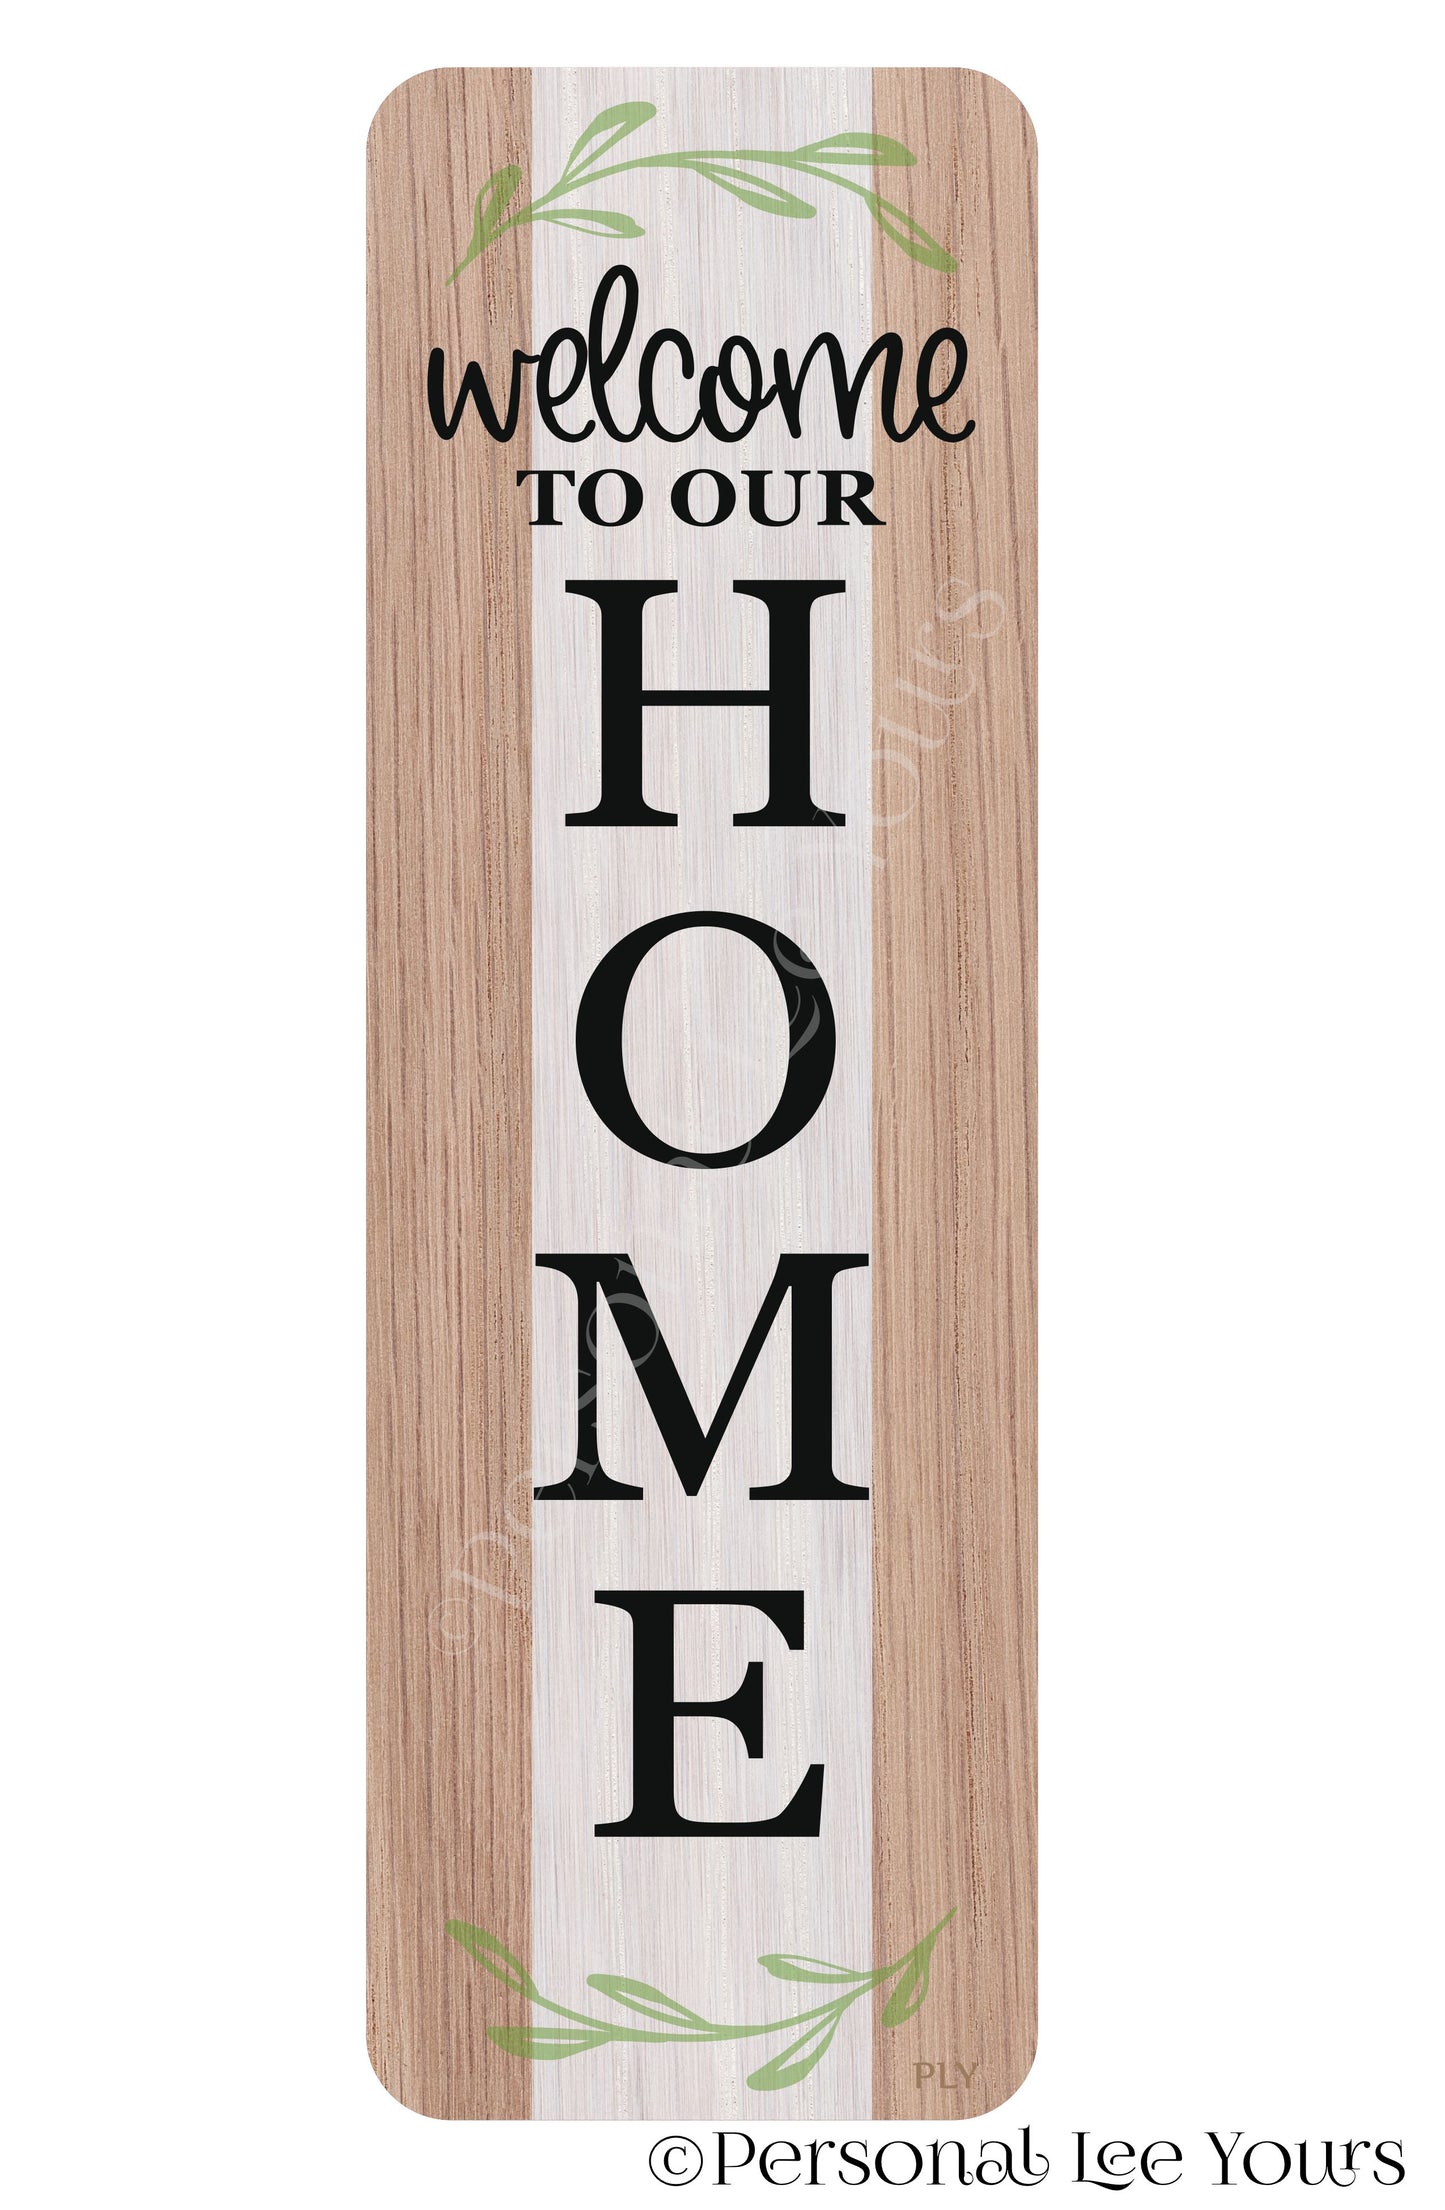 Wreath Sign * Farmhouse Banner * Welcome To Our Home * 4" x 12" * Lightweight Metal